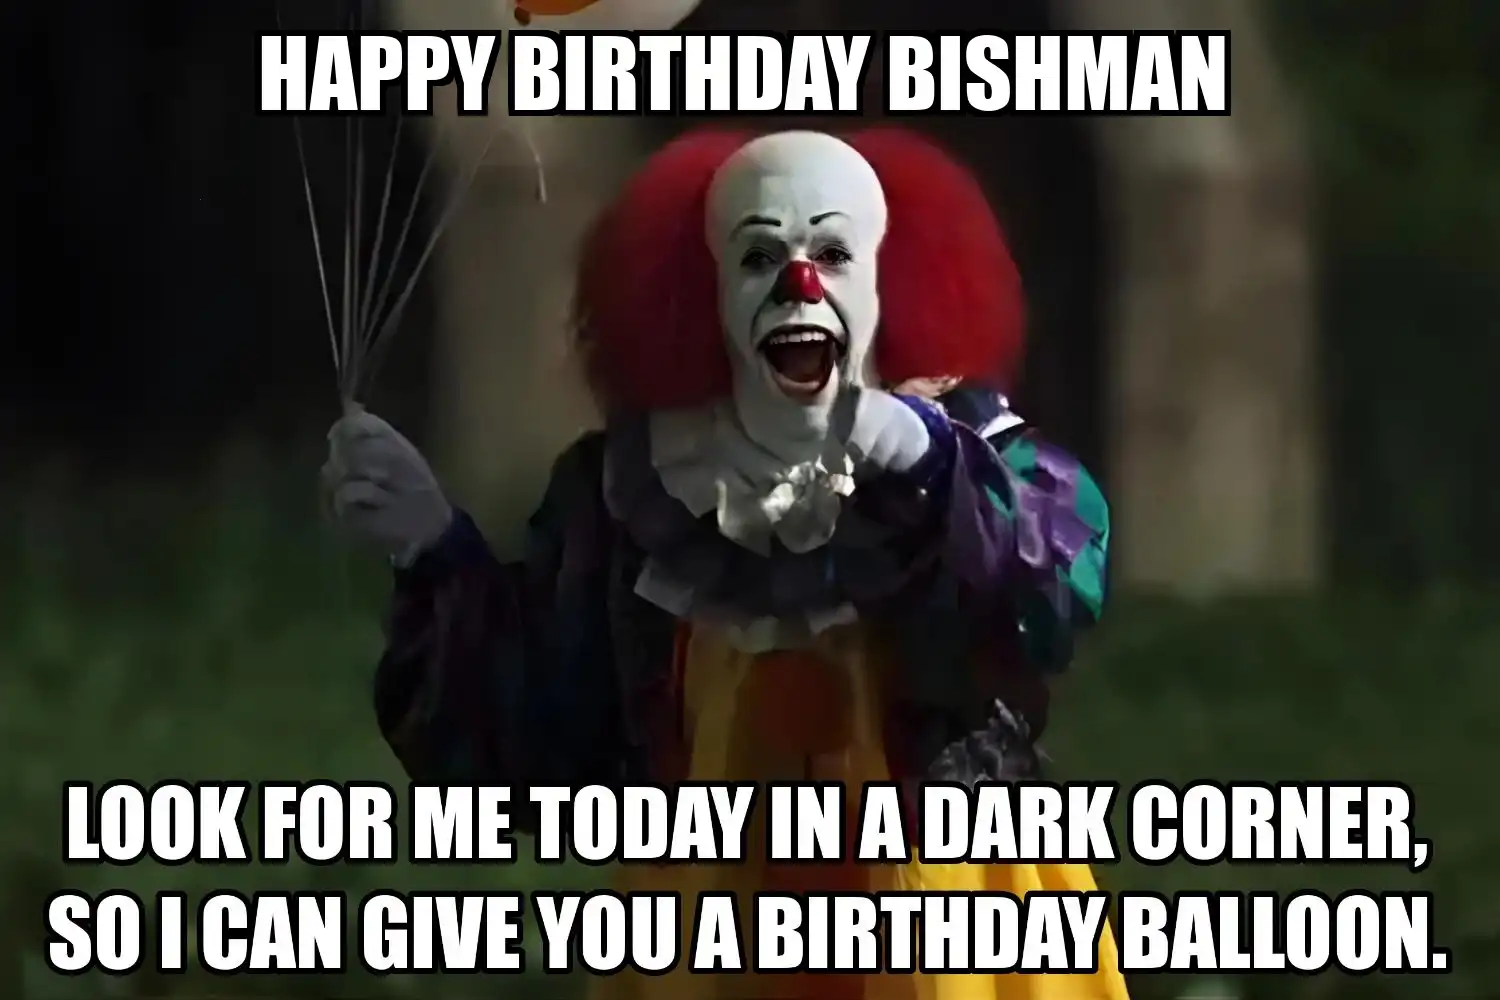 Happy Birthday Bishman I Can Give You A Balloon Meme